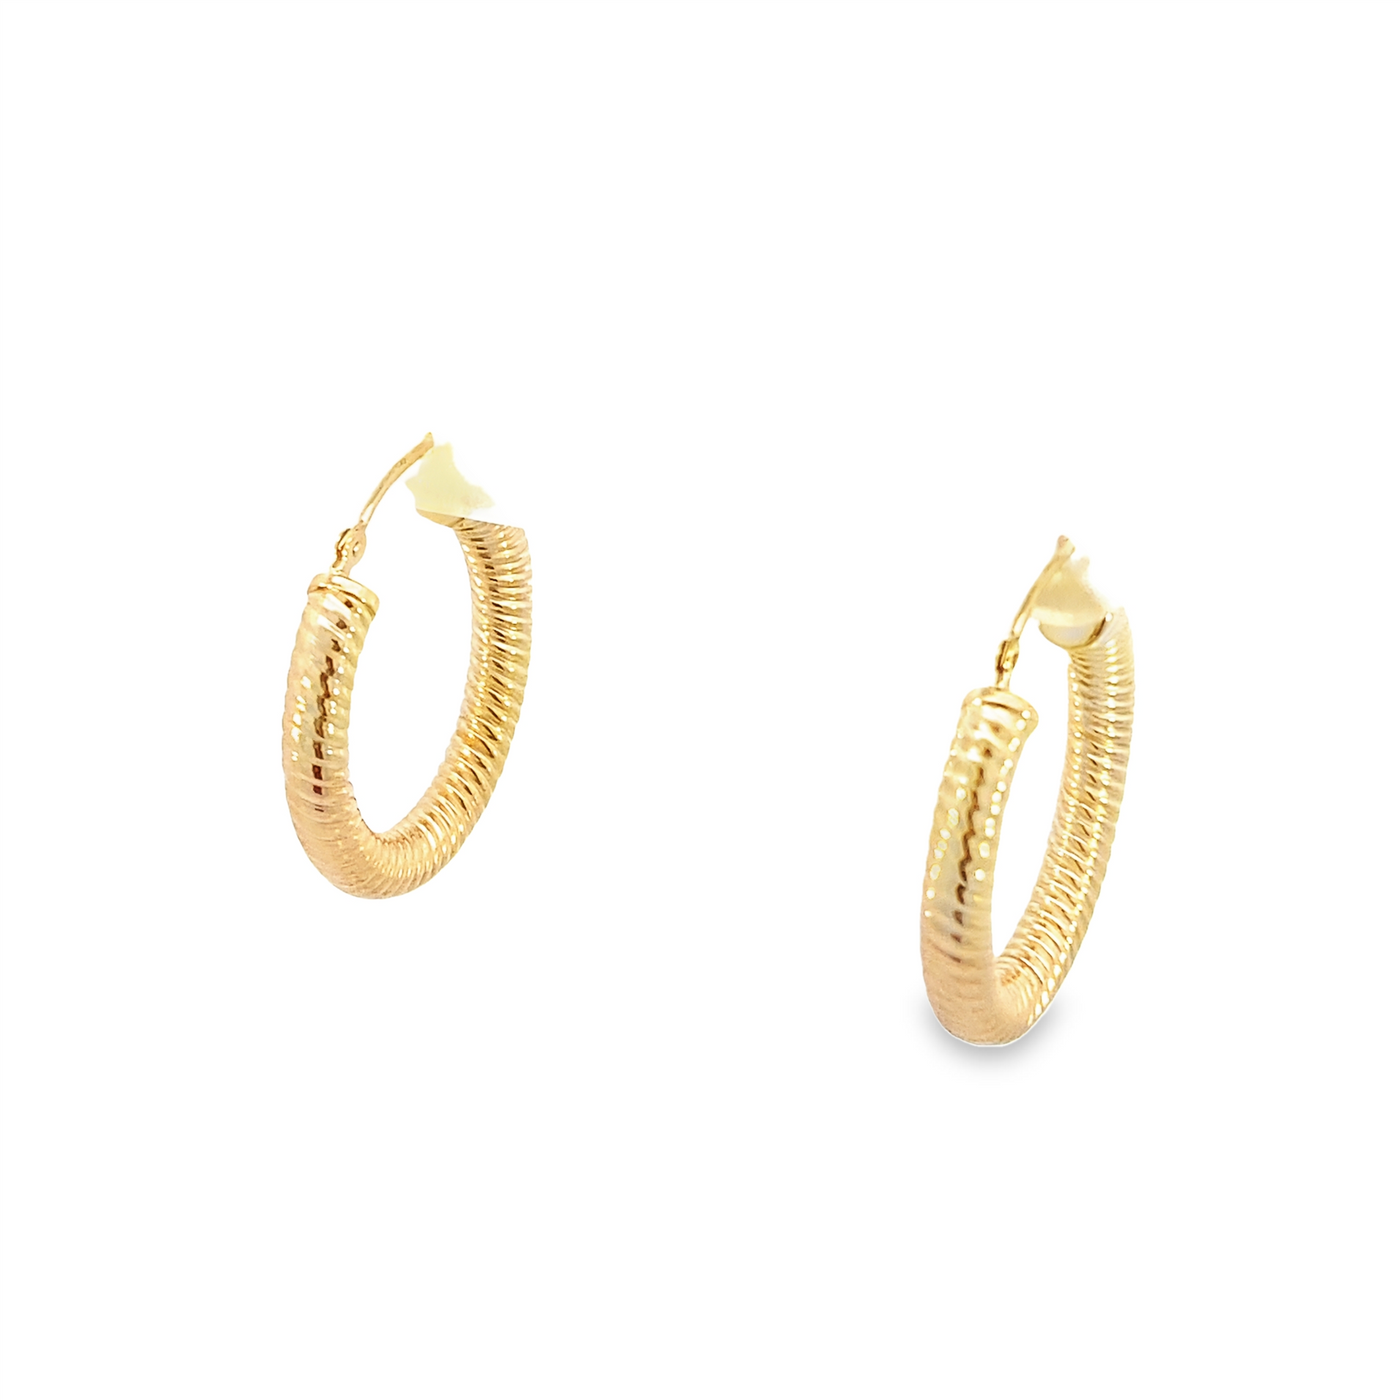 Estate 14K Yellow Gold 3.5mm x 25mm Traditional Round Hoop Style Earrings